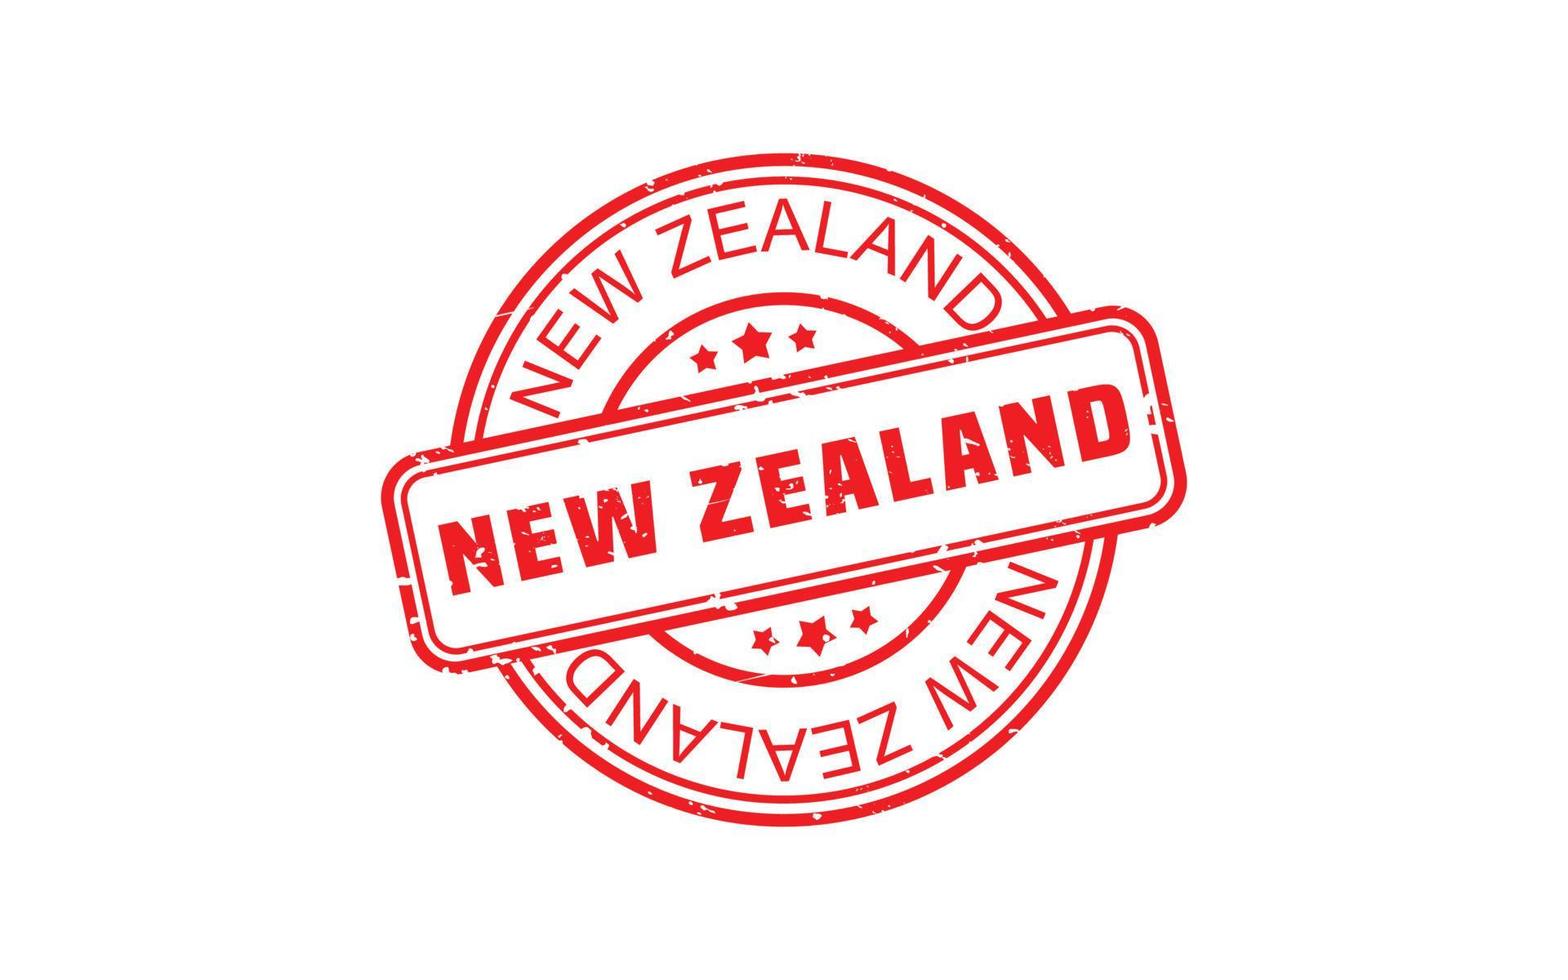 NEW ZEALAND stamp rubber with grunge style on white background vector